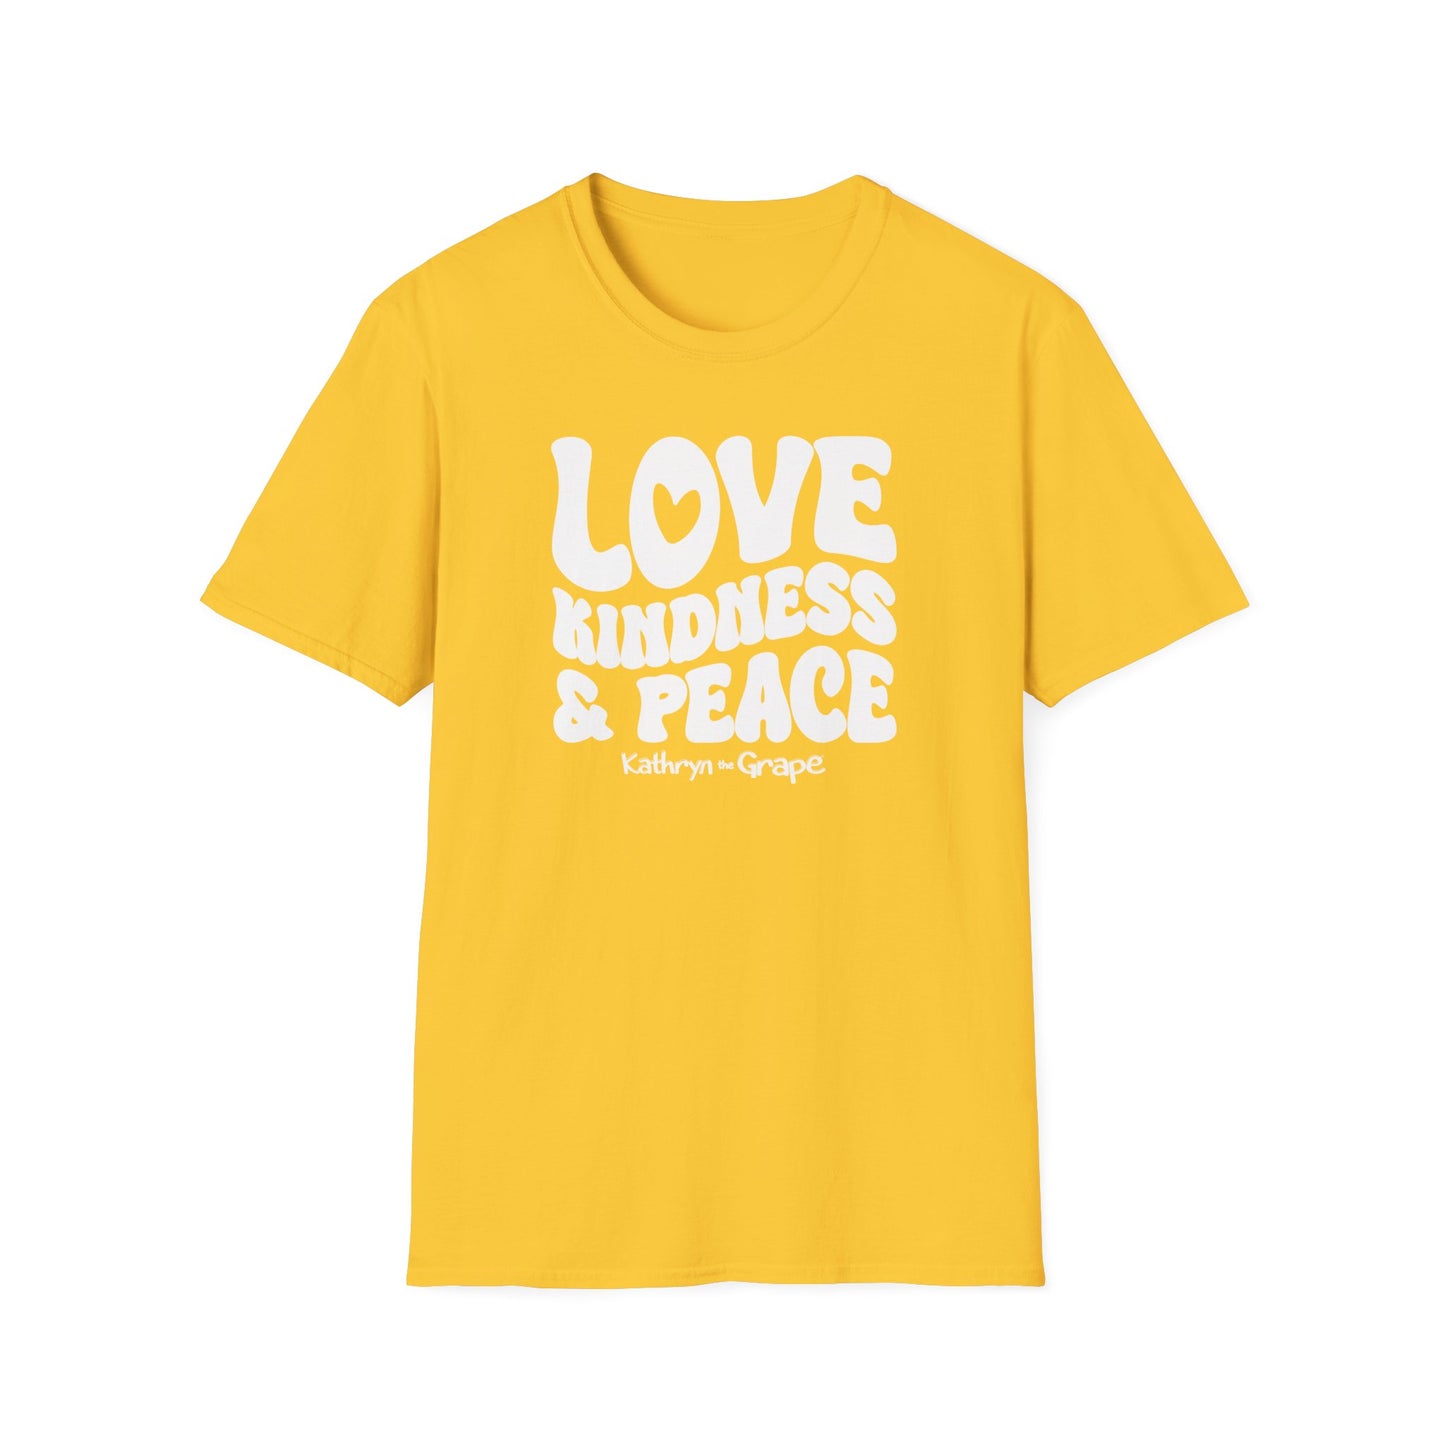 Kathryn the Grape Love, Kindness, and Peace Teen/Adult Unisex Softstyle T-Shirt